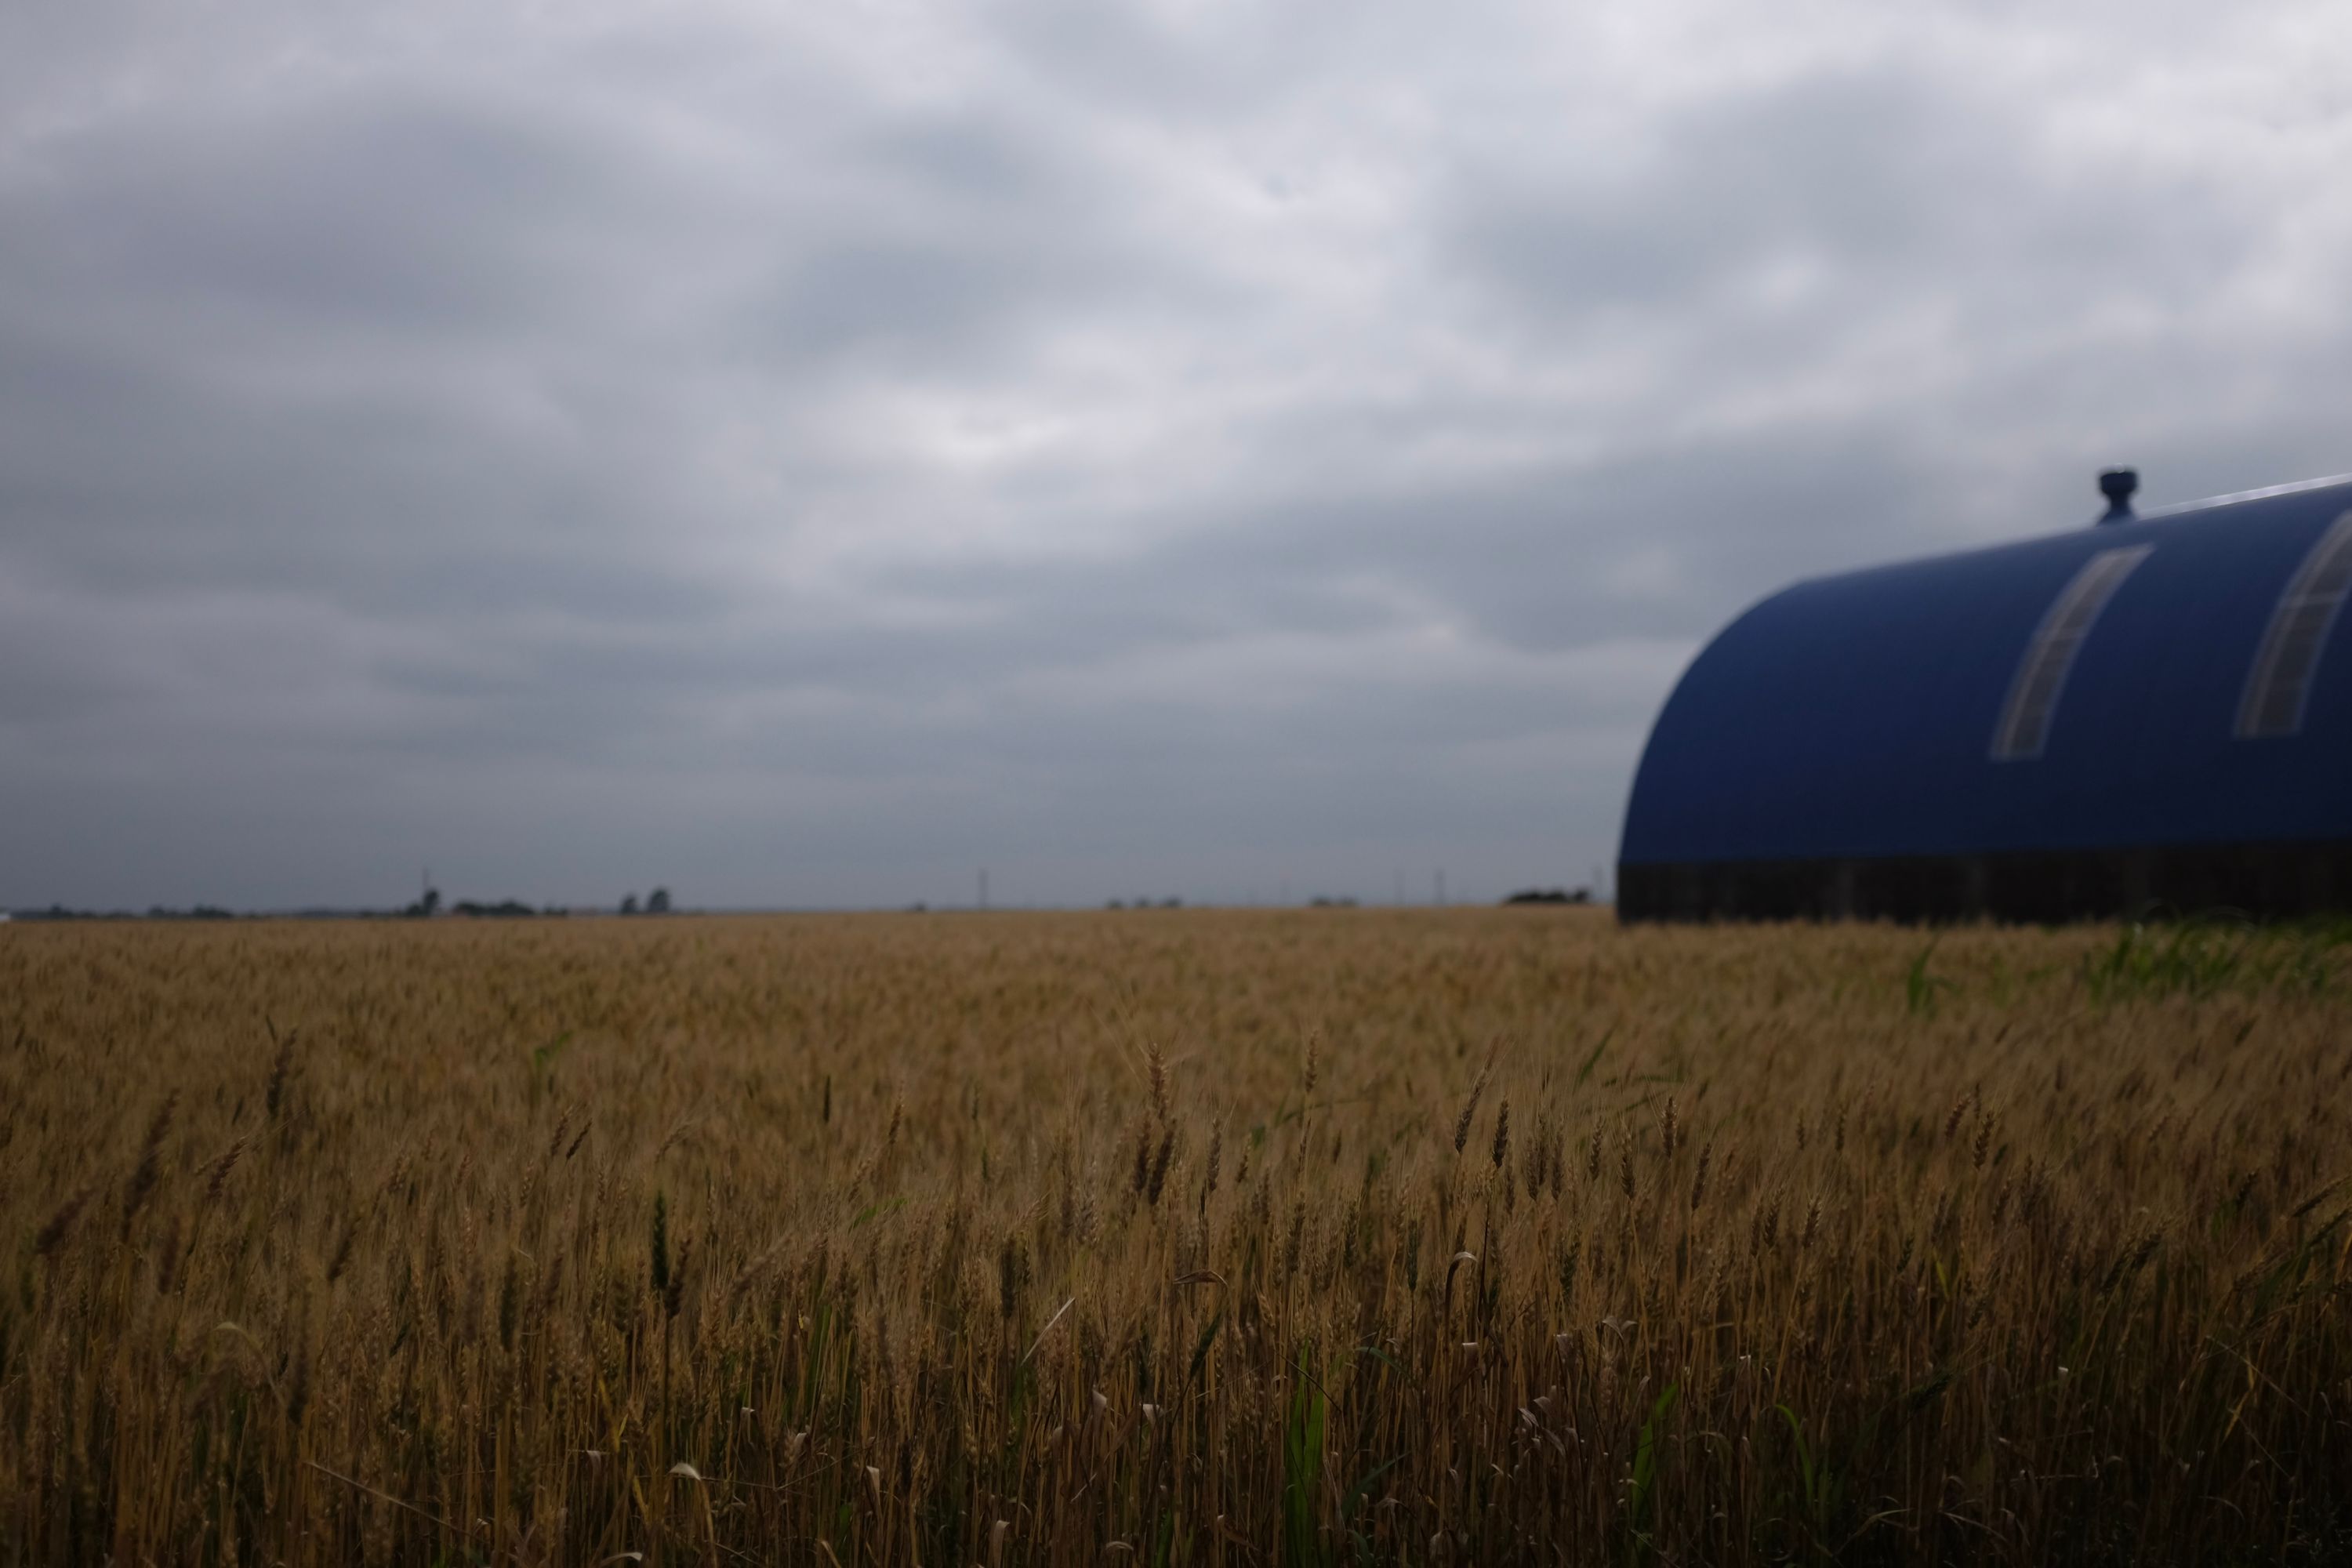 Ground-level view across a wheat field, with a large blue building on the side.